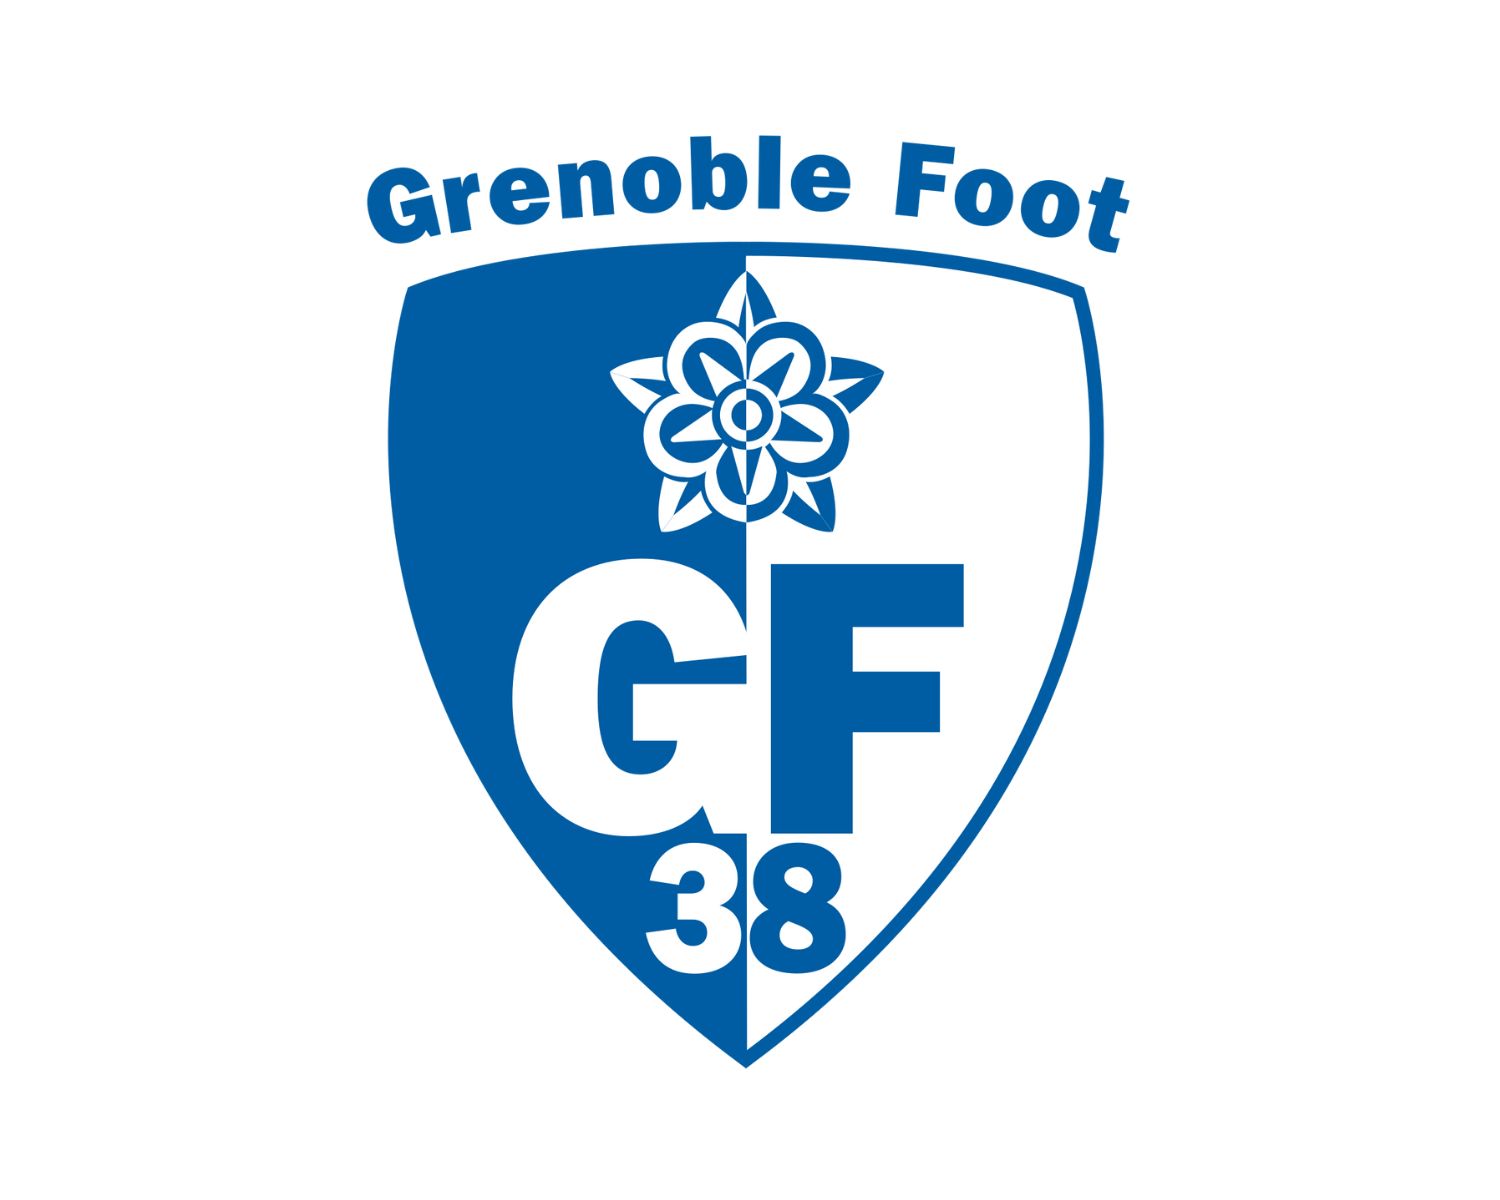 grenoble-foot-38-24-football-club-facts